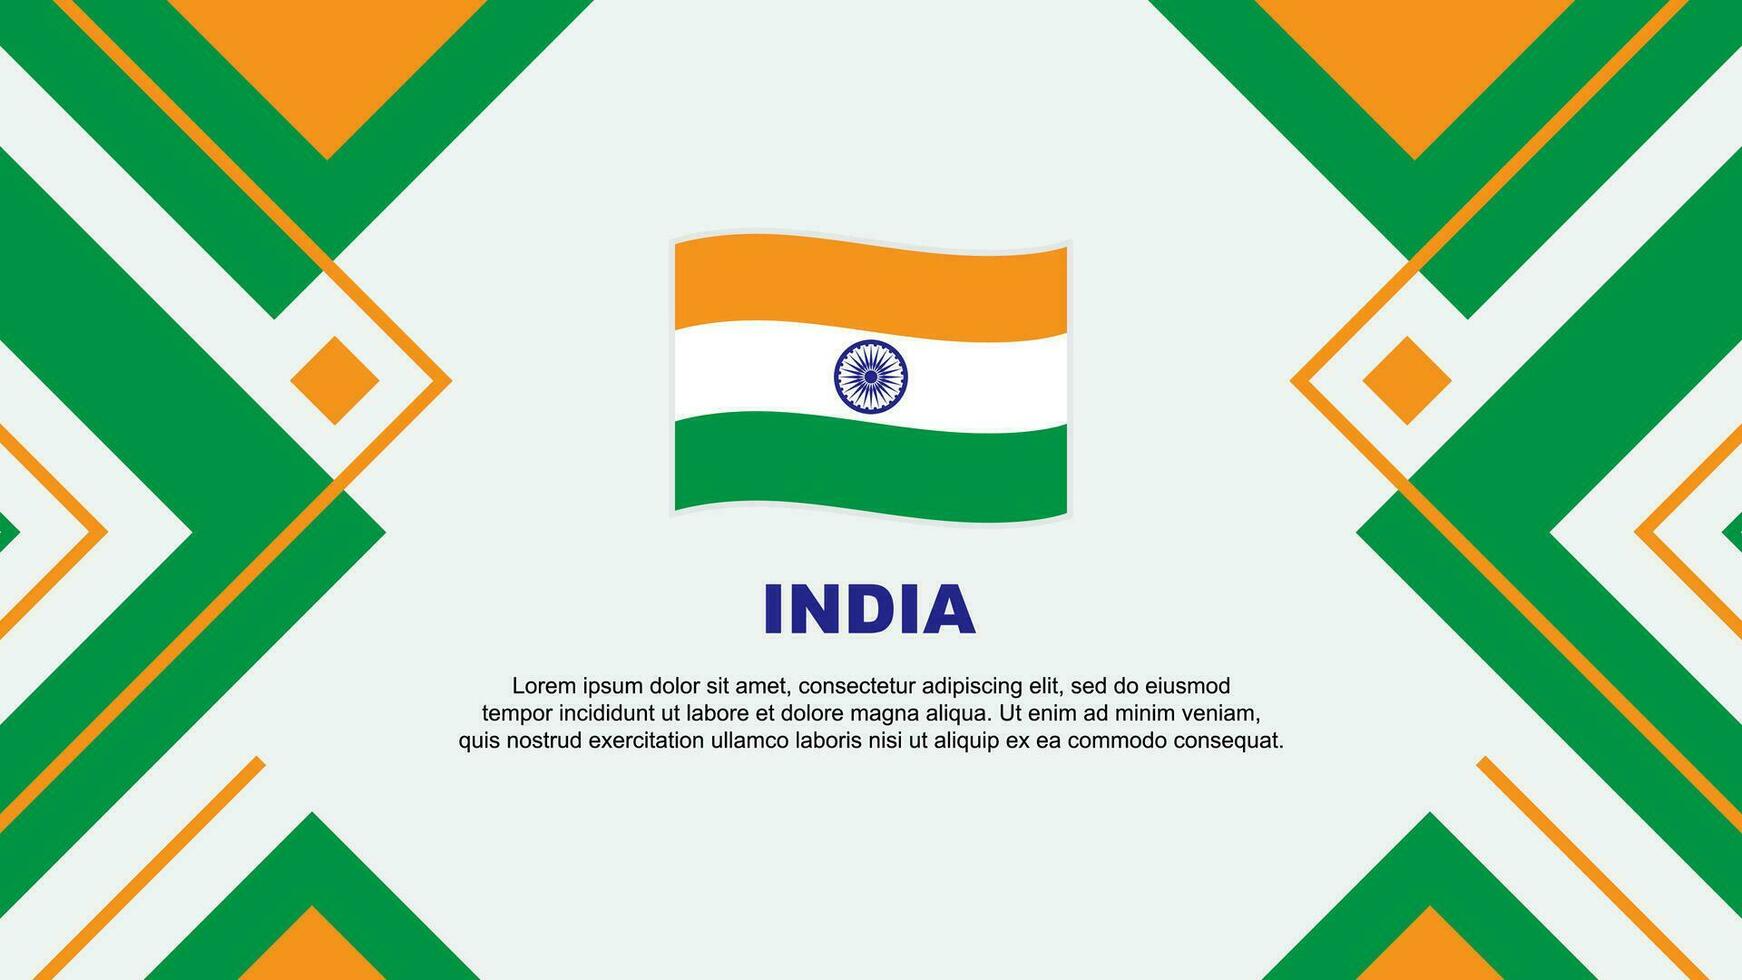 India Flag Abstract Background Design Template. India Independence Day Banner Wallpaper Vector Illustration. India Illustration